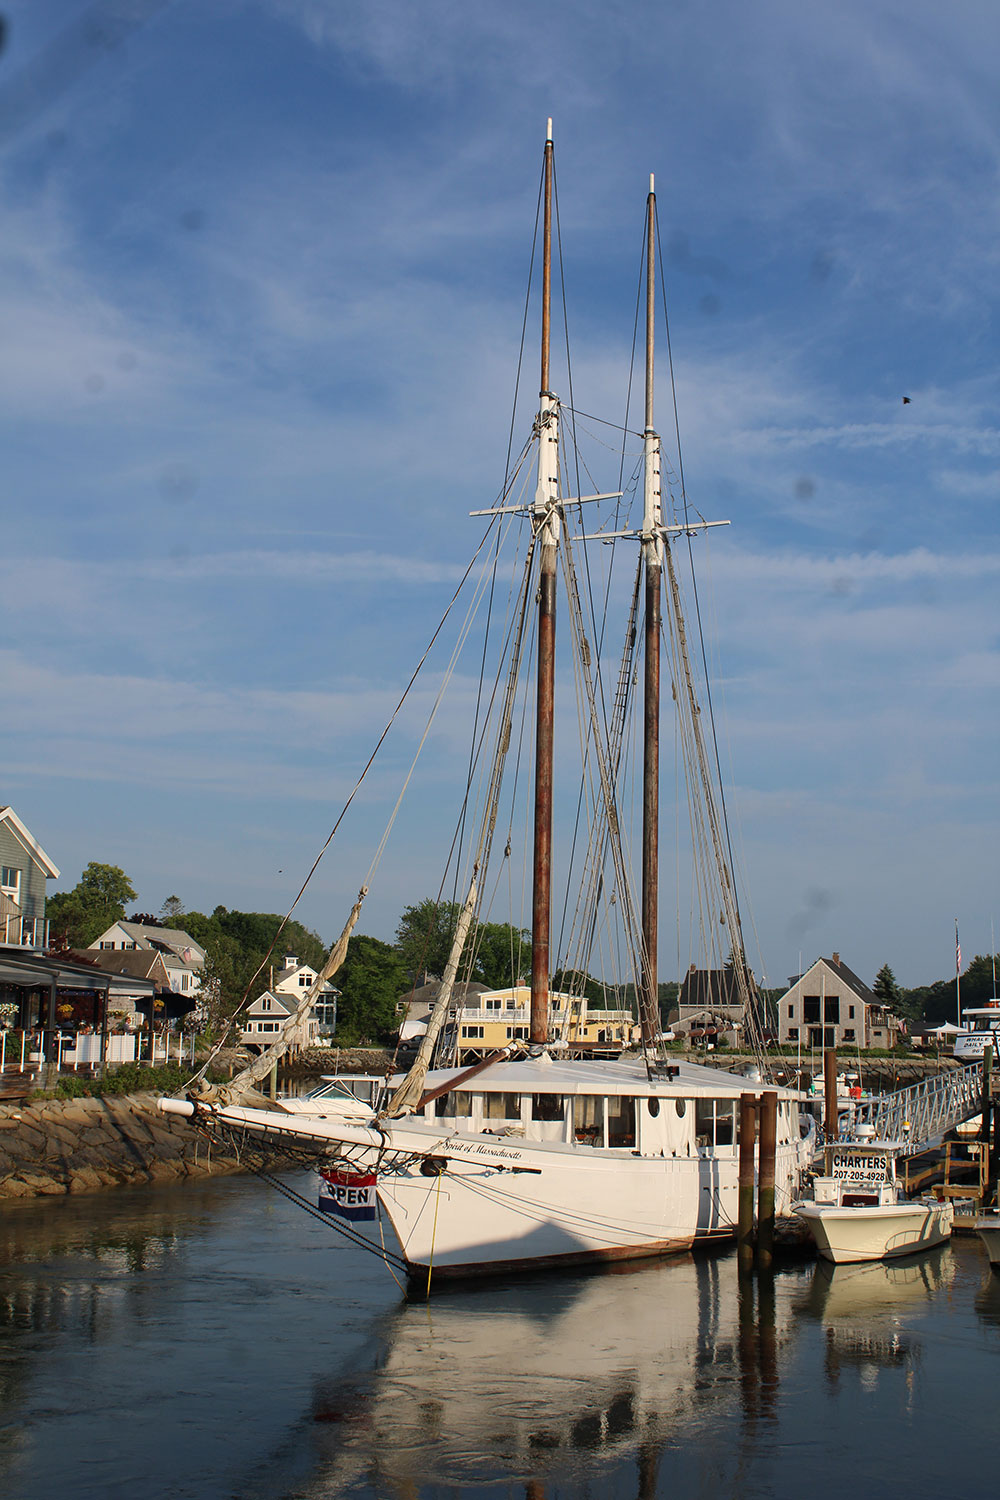 New England Towns - Kennebunkport, ME